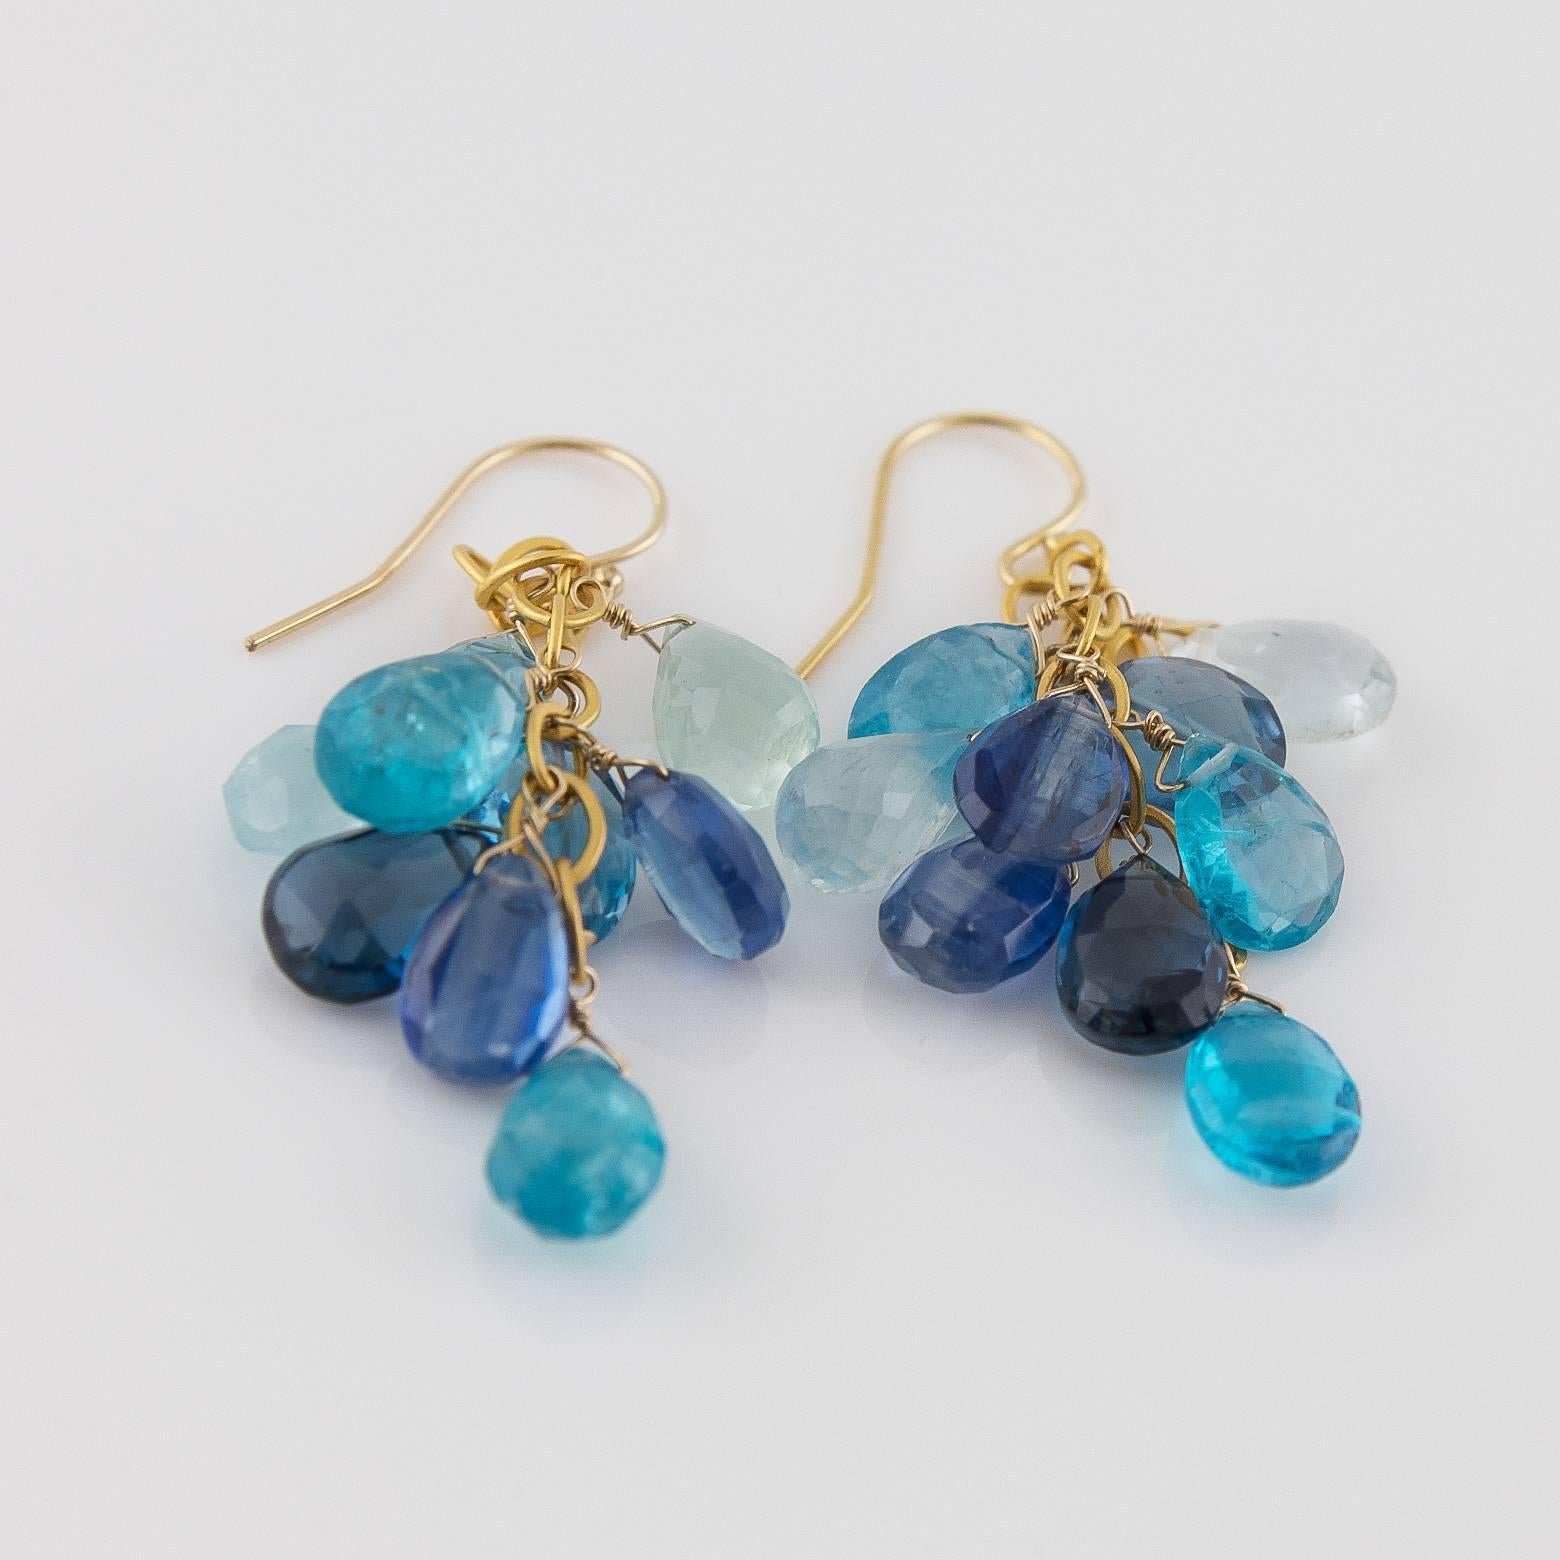 Miraculous and Sparkly! These multi-colored blue dangling beauties sparkle in almost every shade of blue showcasing aquamarines, kyanites, blue topaz, and apatites. The movement of these earrings dance below your ears and invite an air of